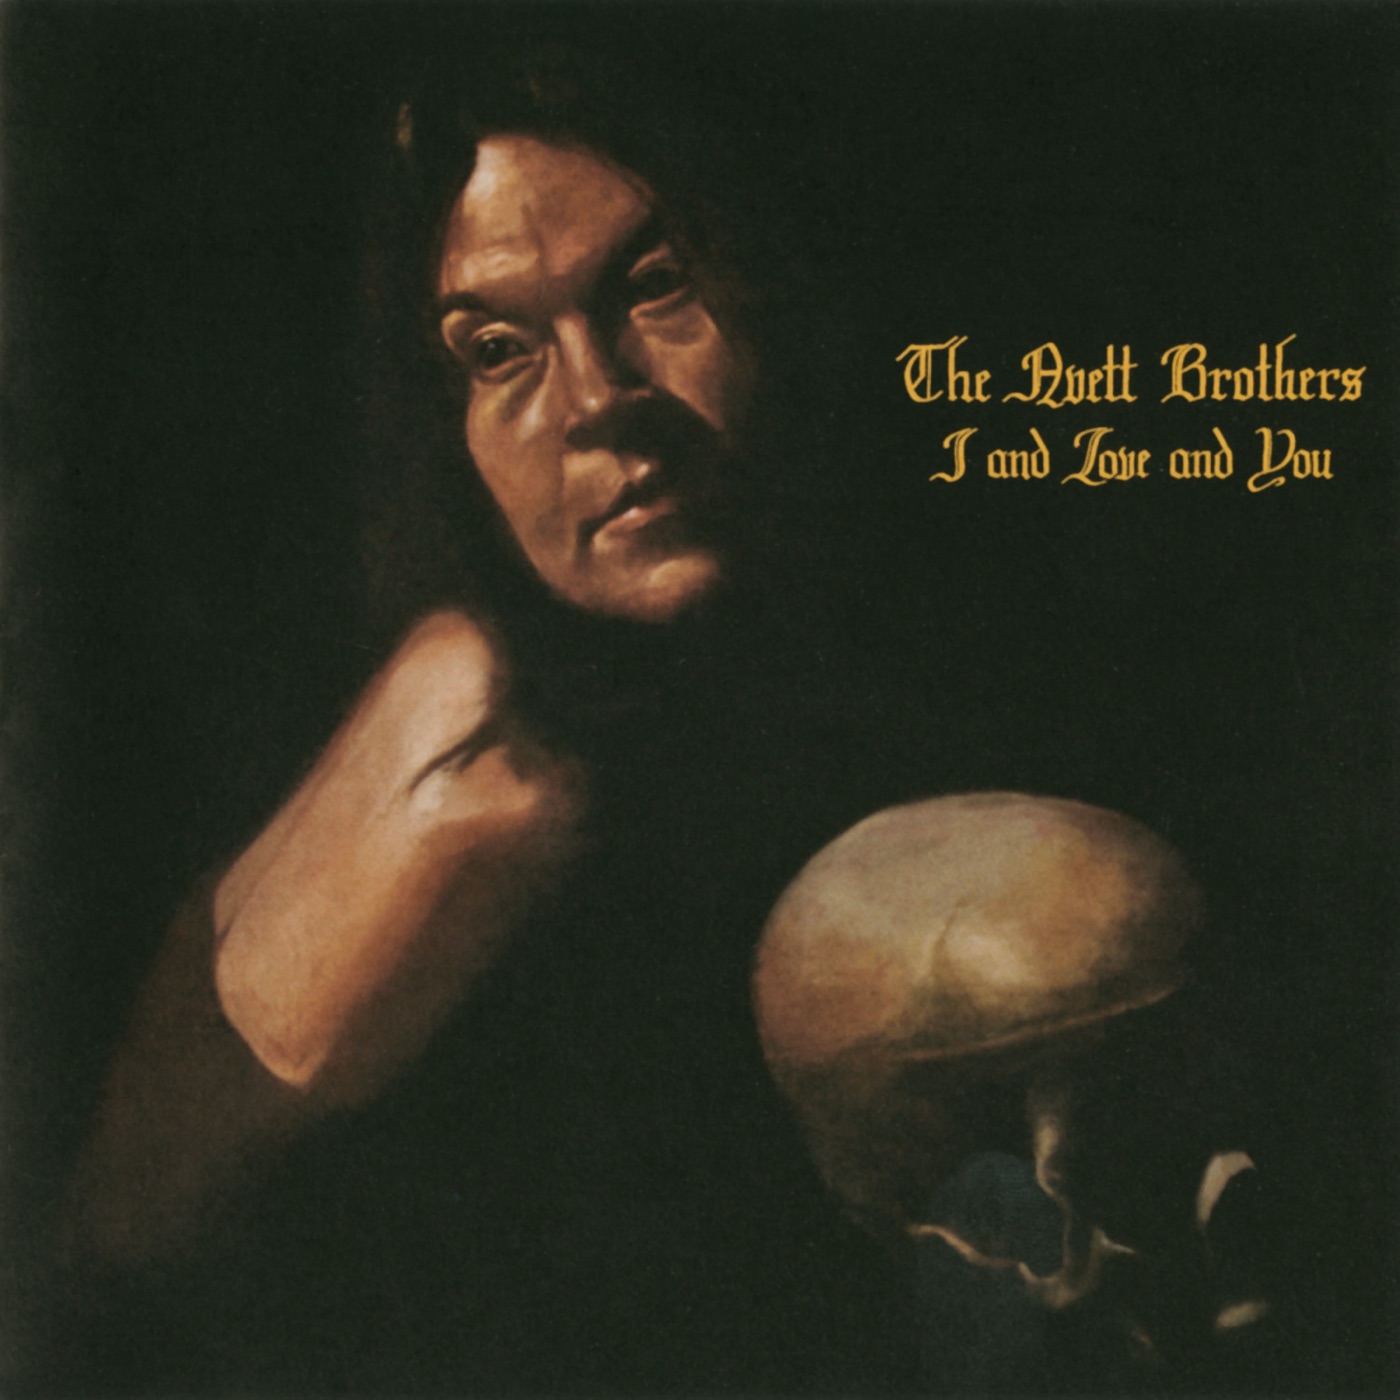 I And Love And You by The Avett Brothers